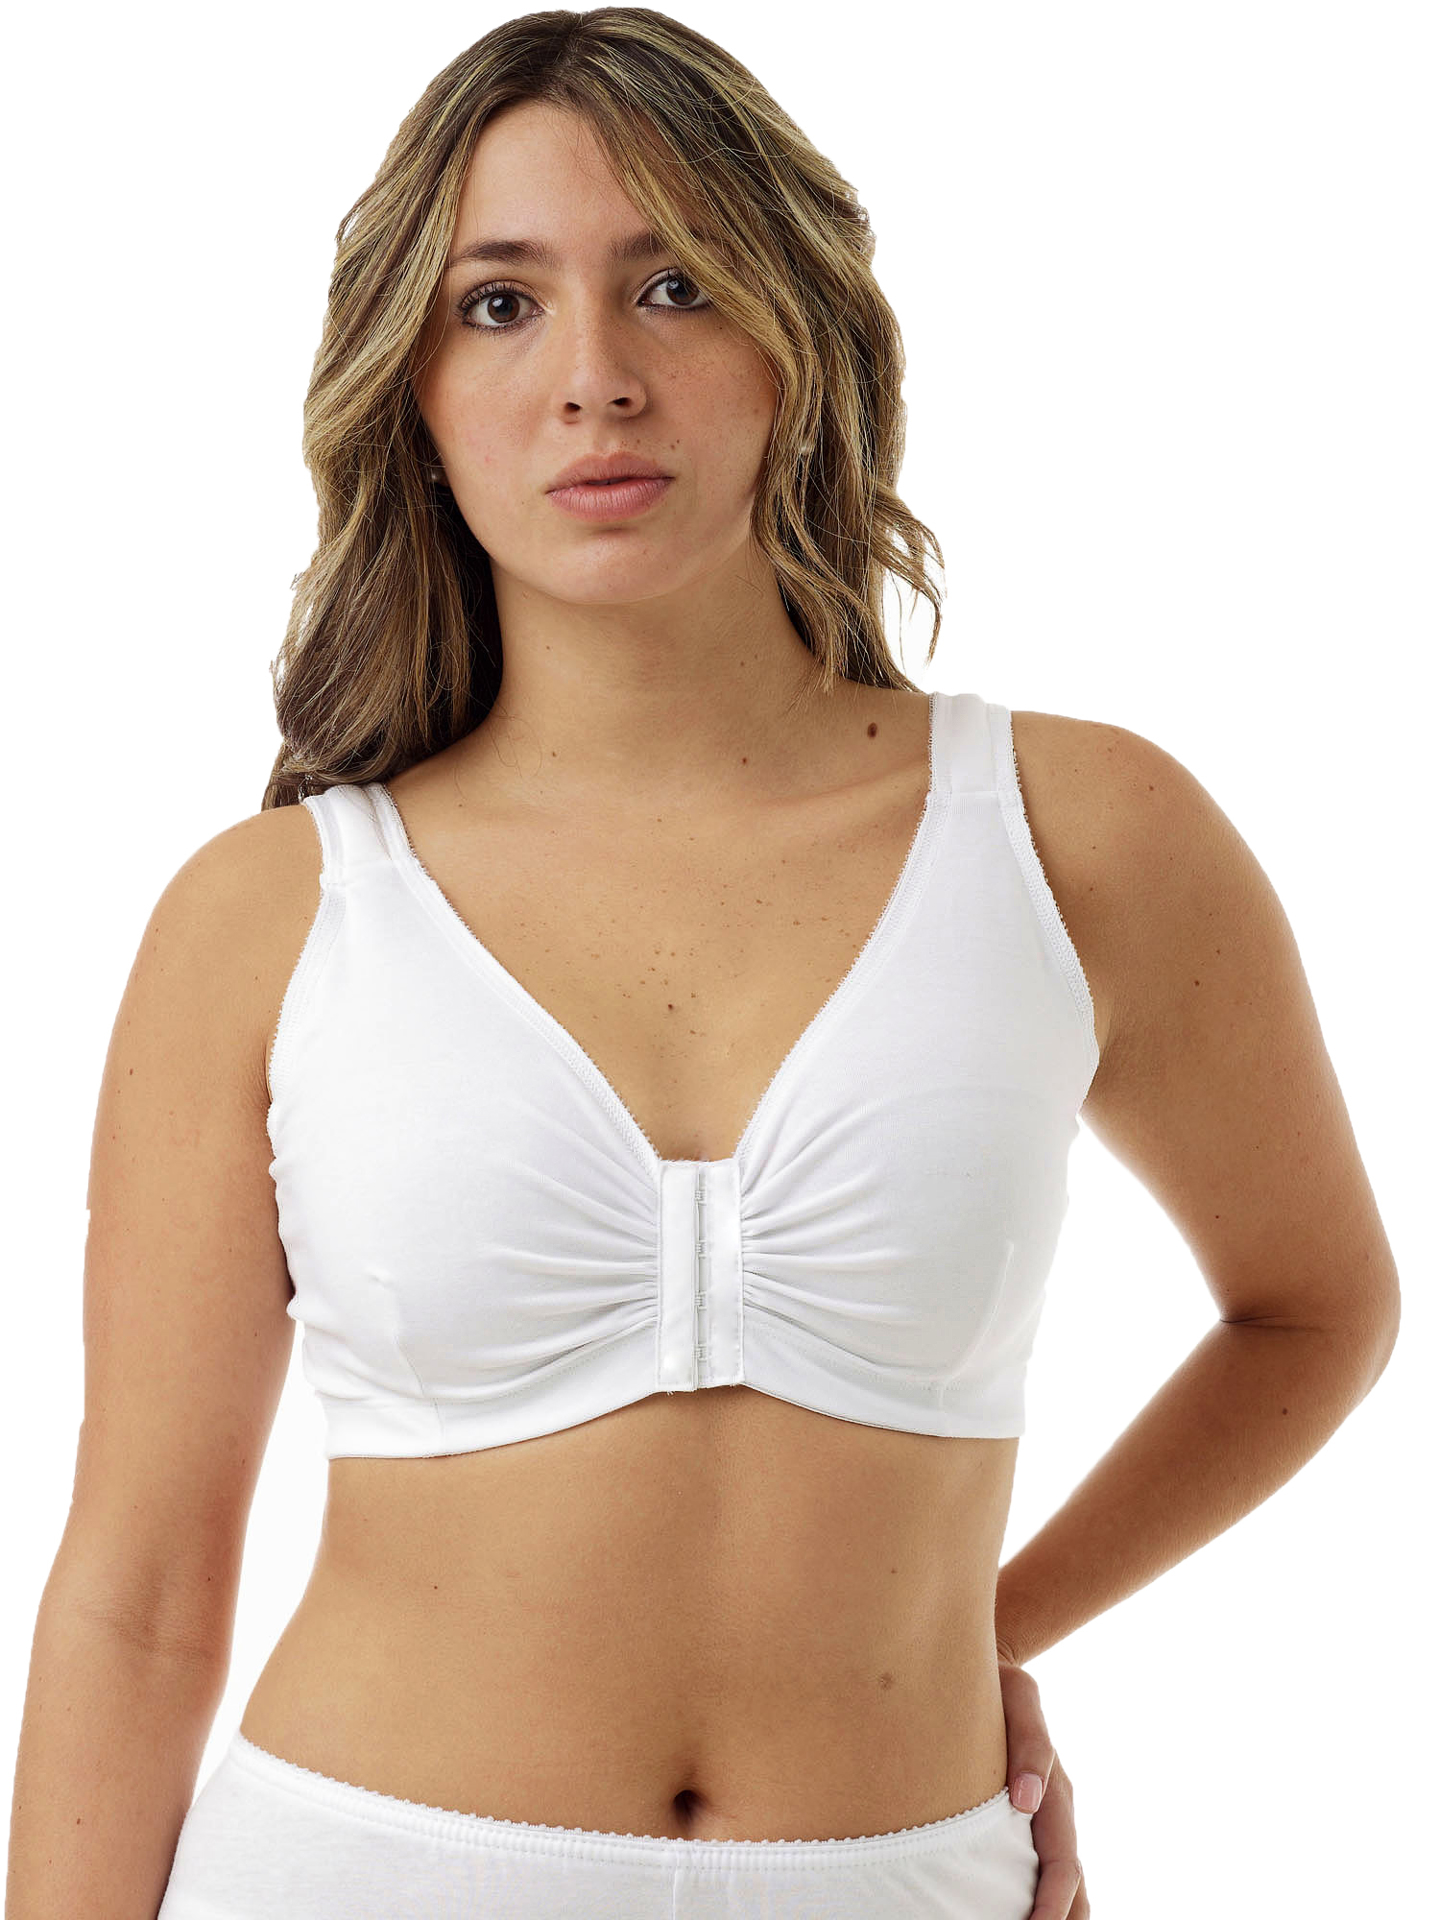  Disposable bra for body freeze treatment